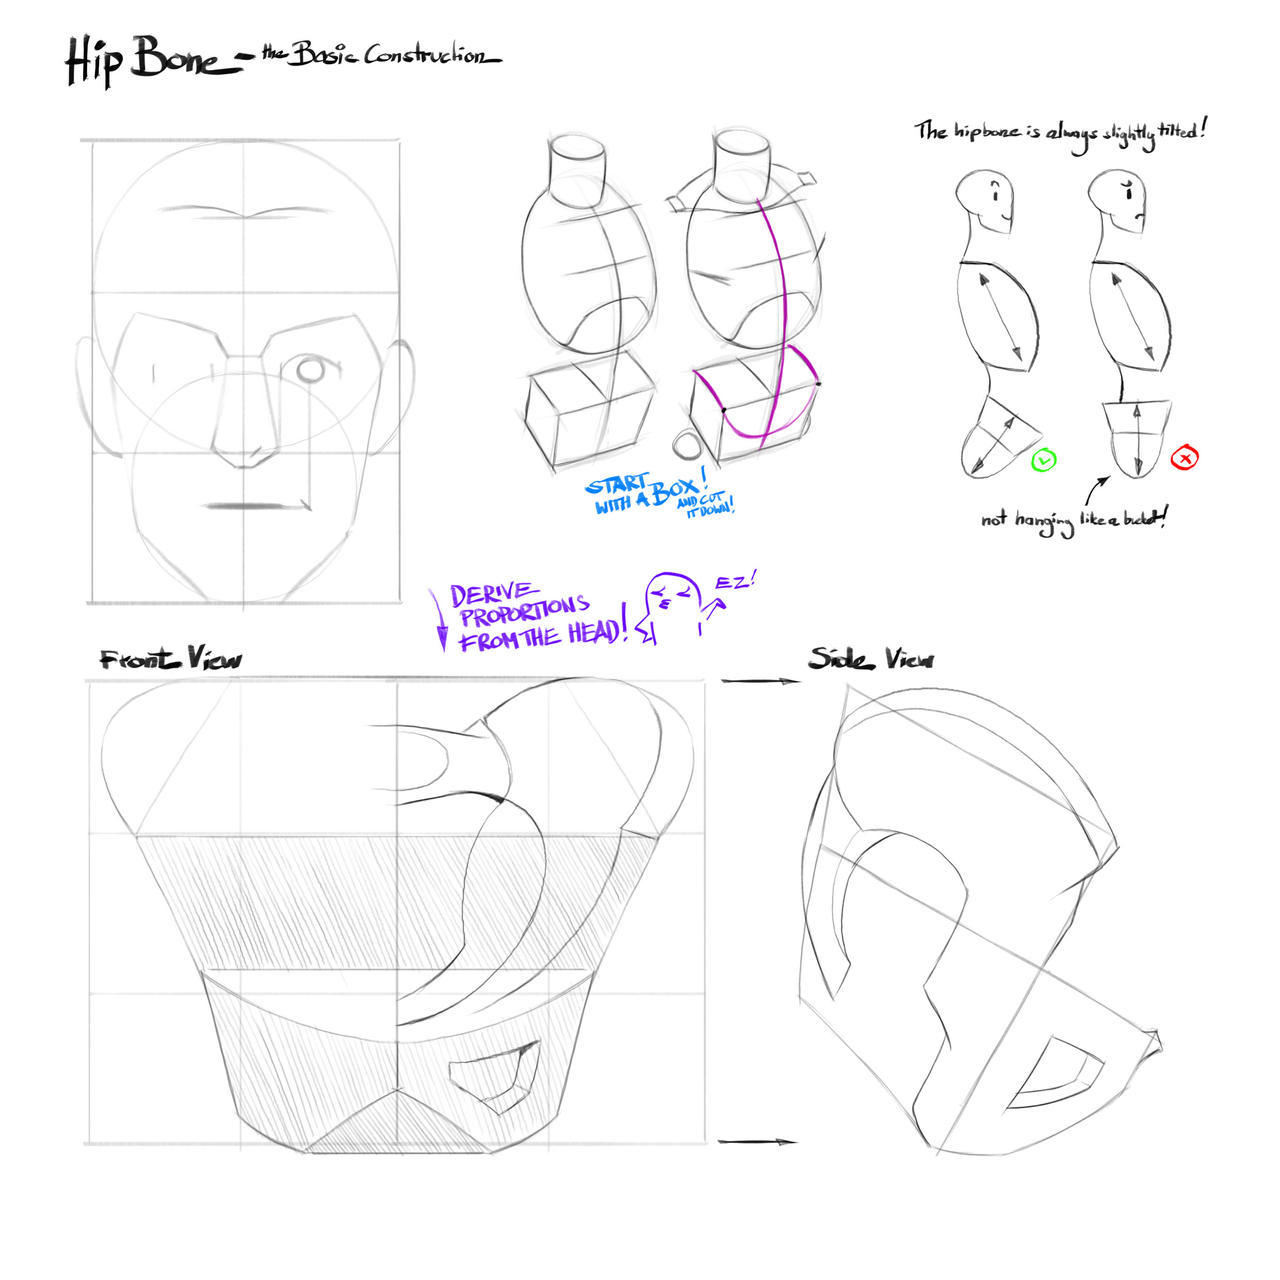 How to Learn How to Draw – Hip Bone Studio